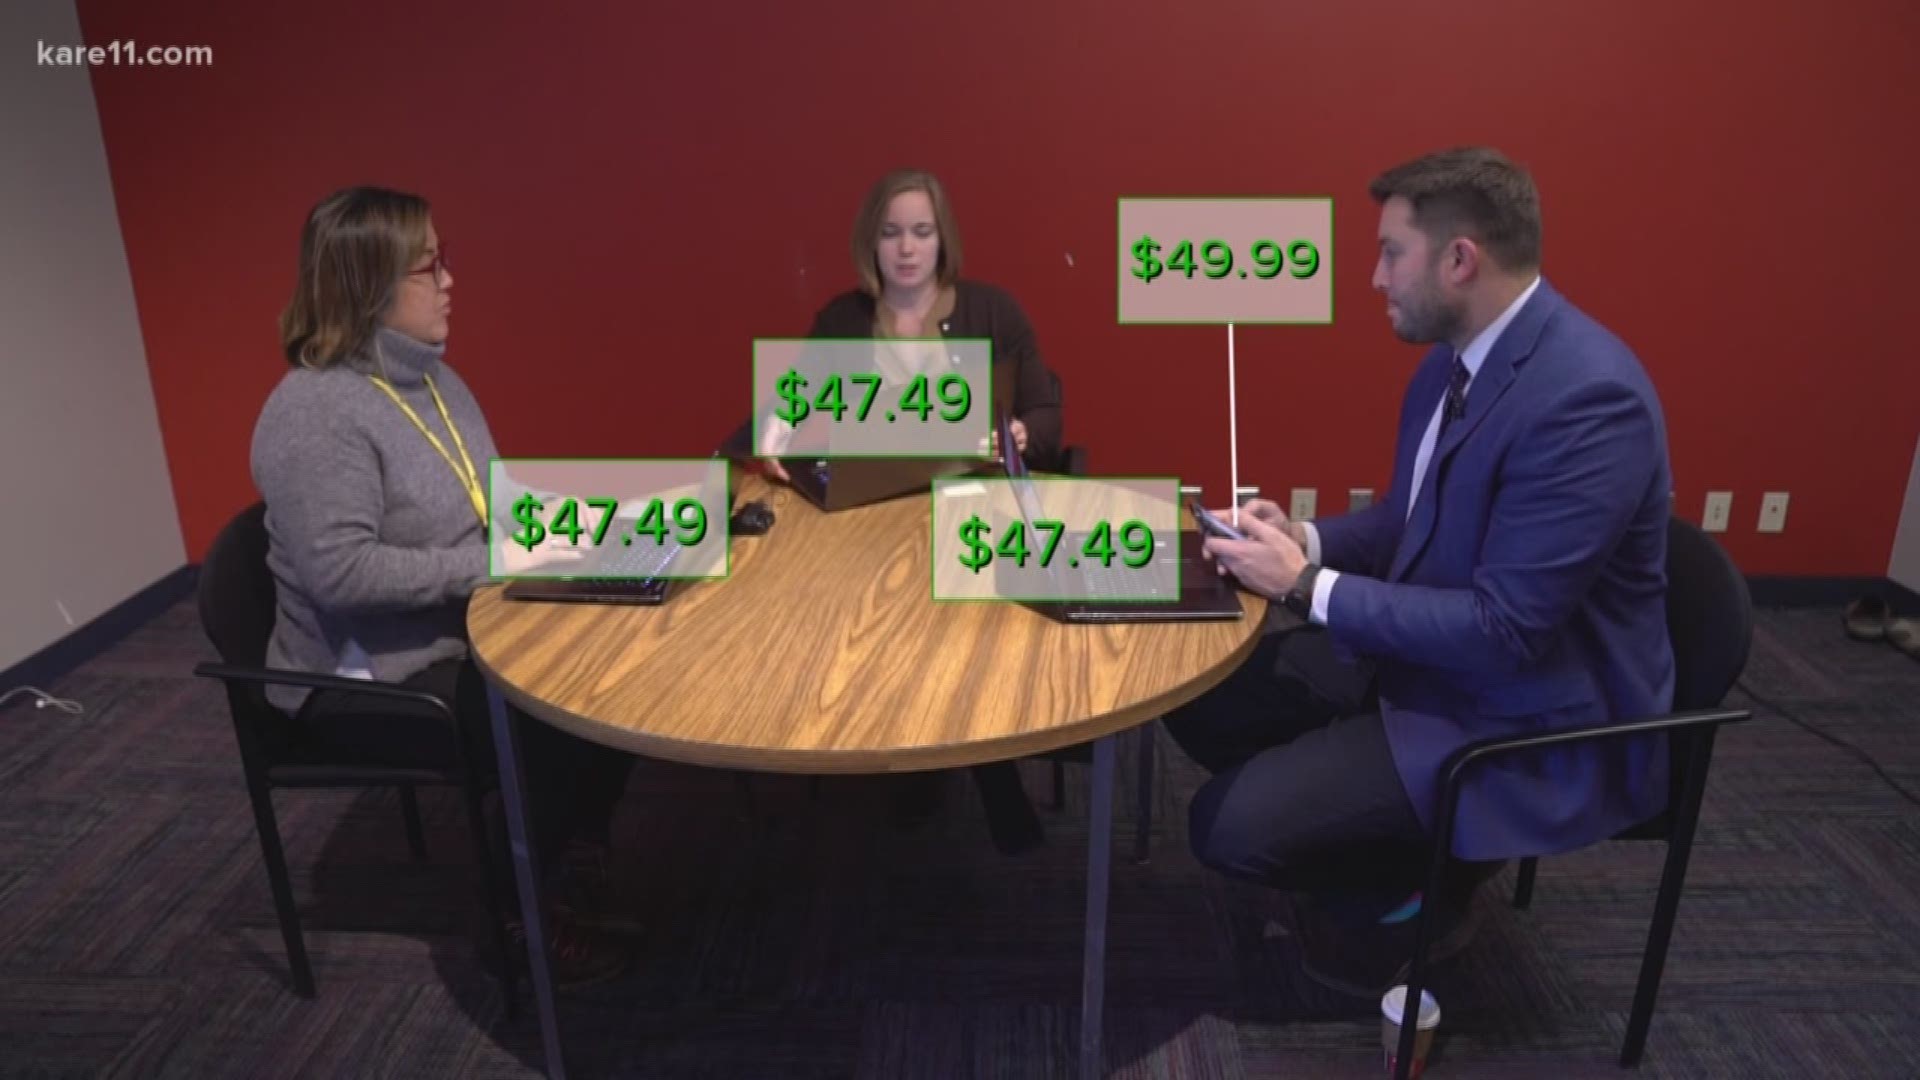 When you shop online, is the person sitting next to you getting a better price for the same product? KARE 11's Chris Hrapsky did some experimenting to find out. https://kare11.tv/2ztjB4r